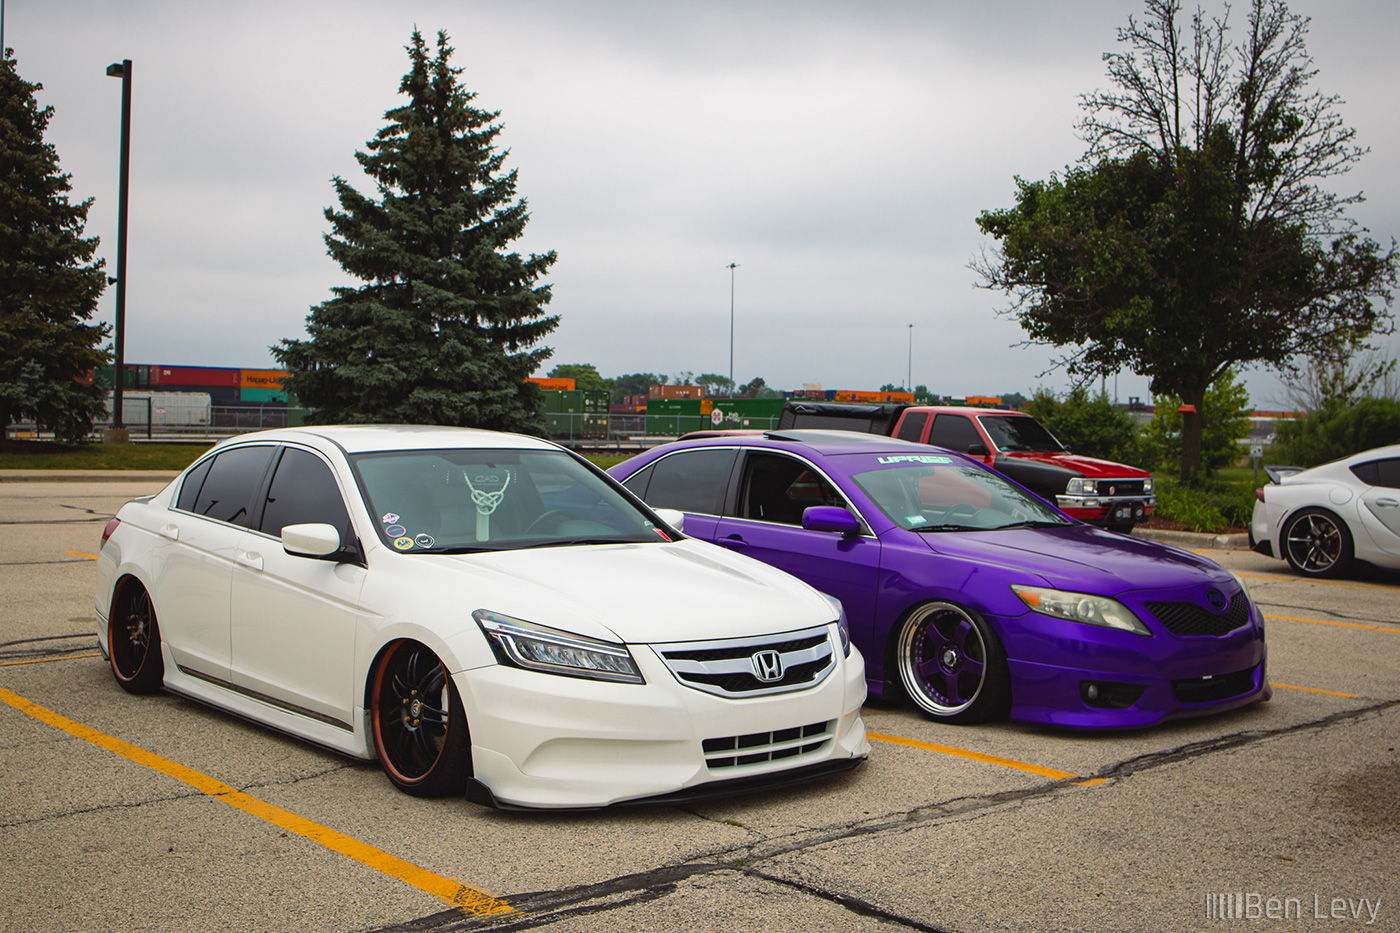 VIP Accord and Camry